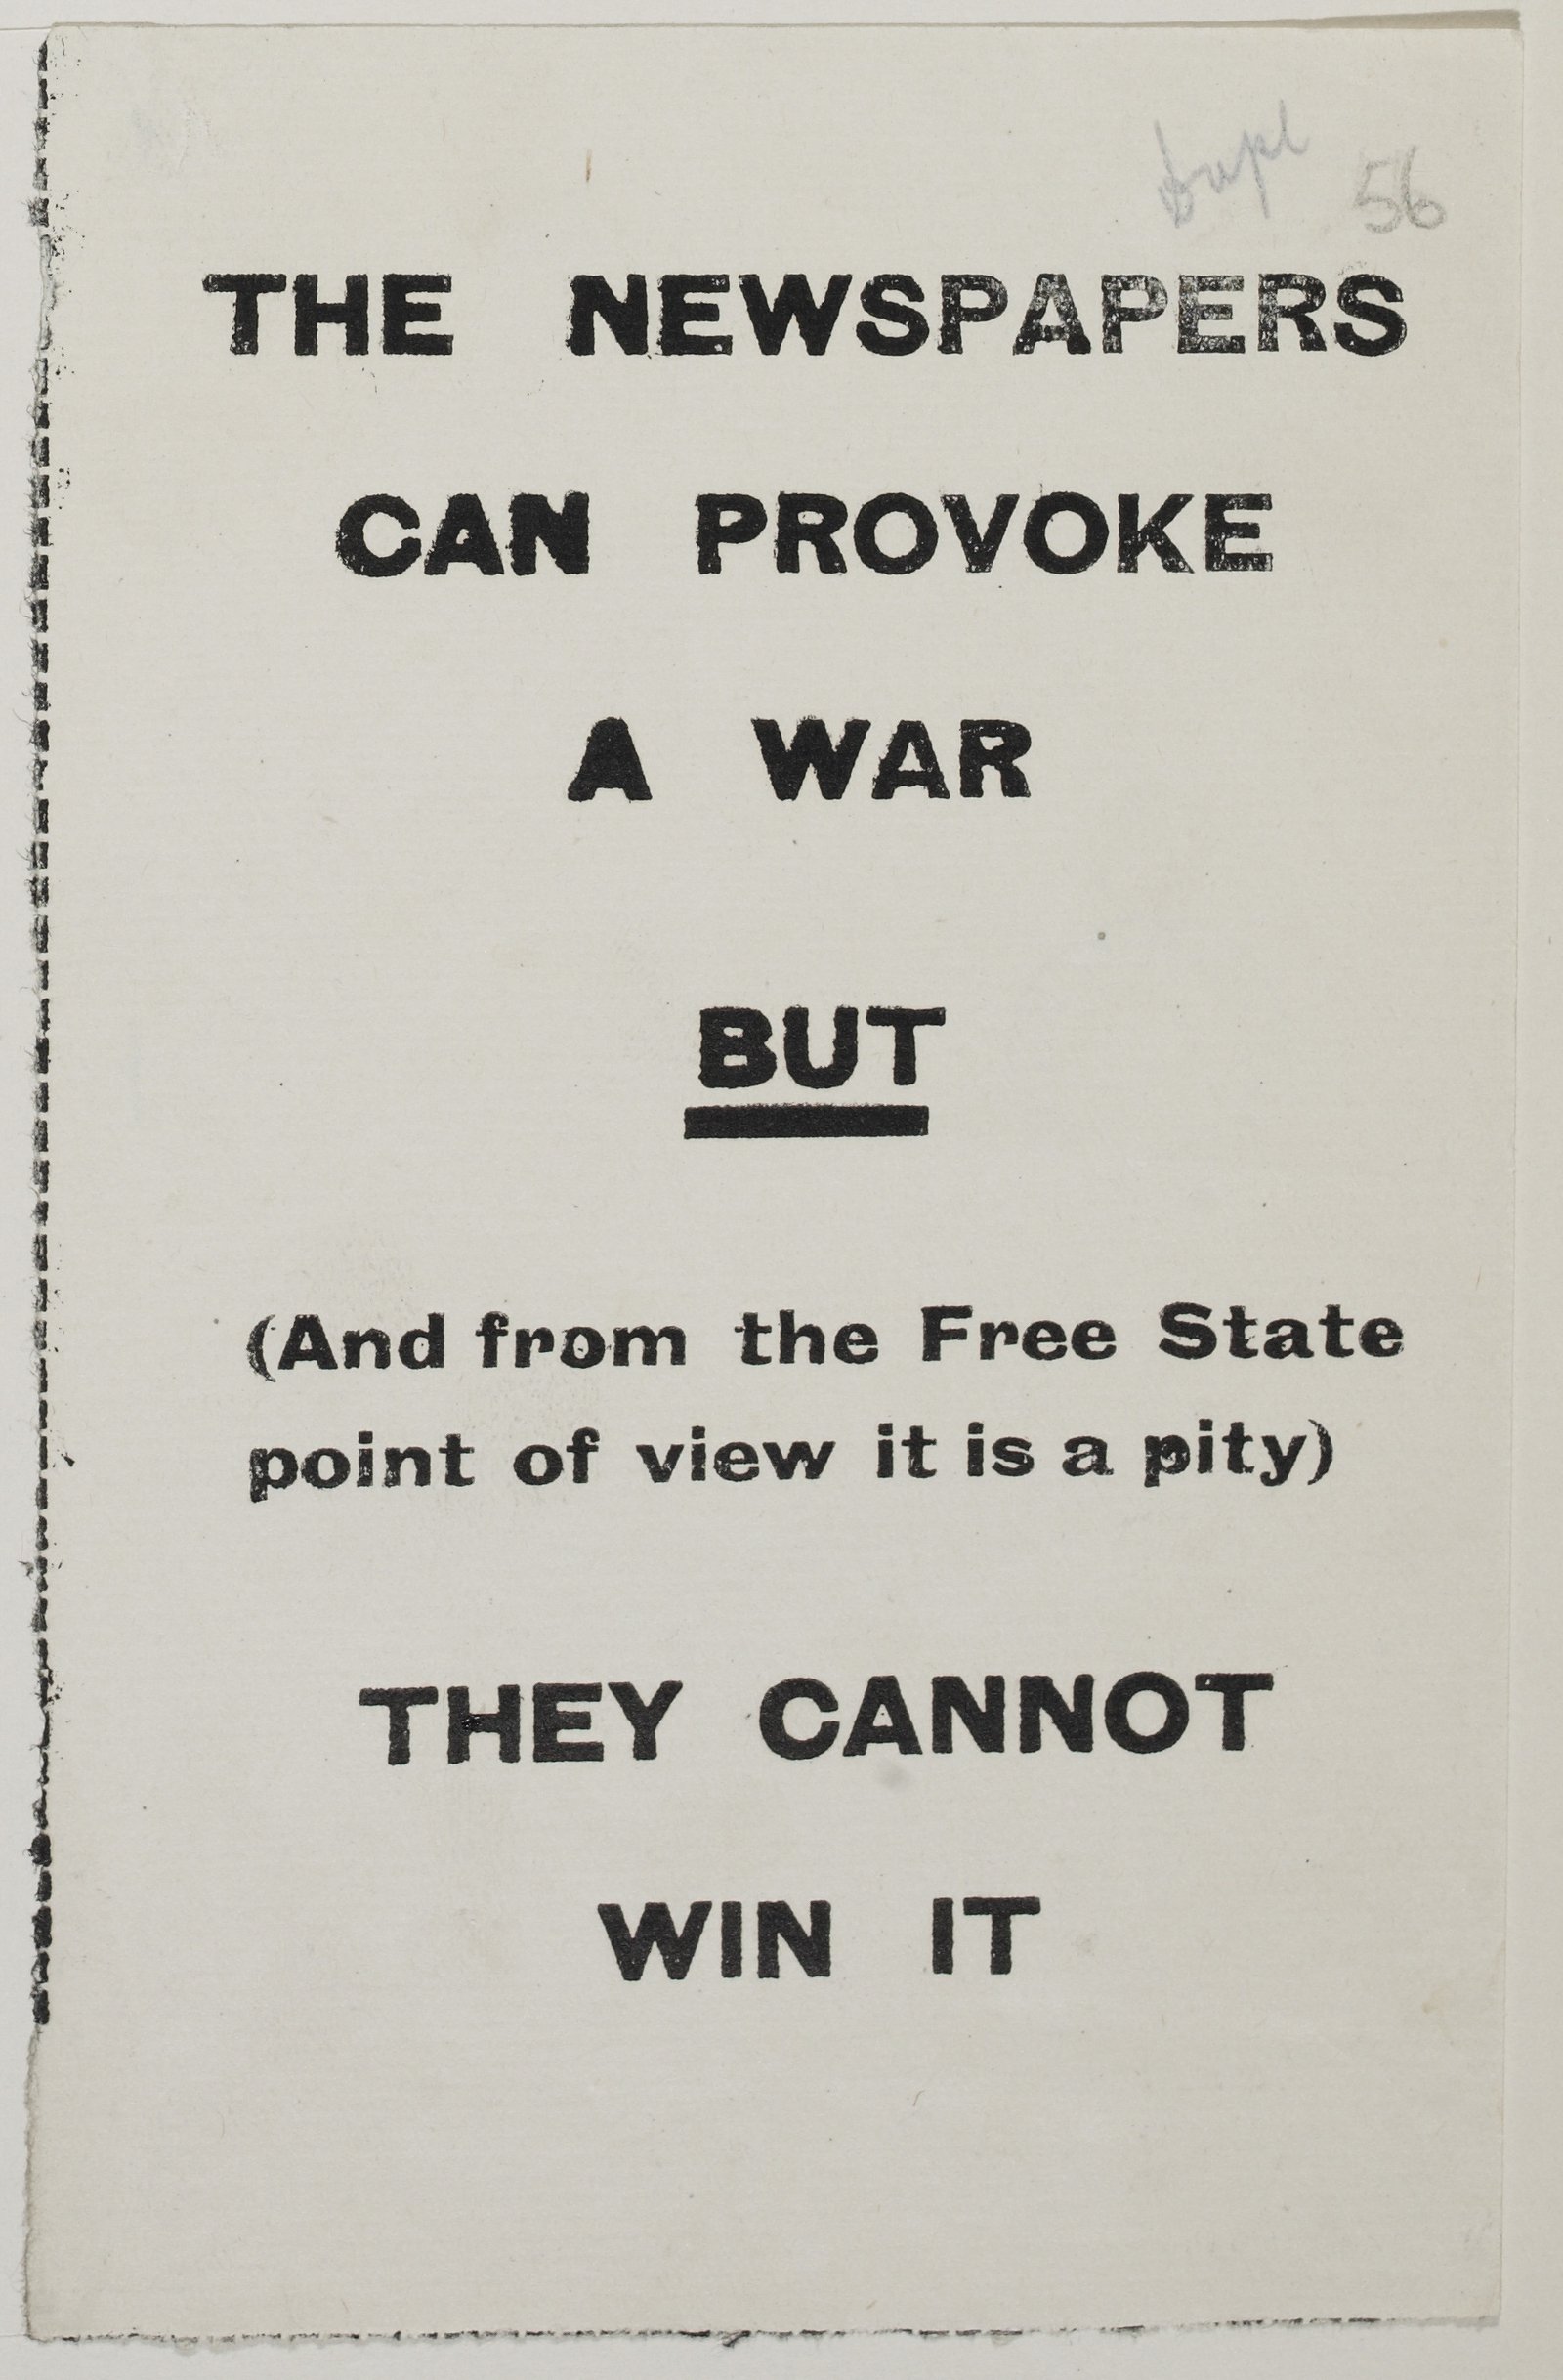 Image - Nearly every newspaper was pro-Treaty - to the frustration of the other side, as reflected in this 1922 handbill attacking media bias. Image courtesy of the National Library of Ireland